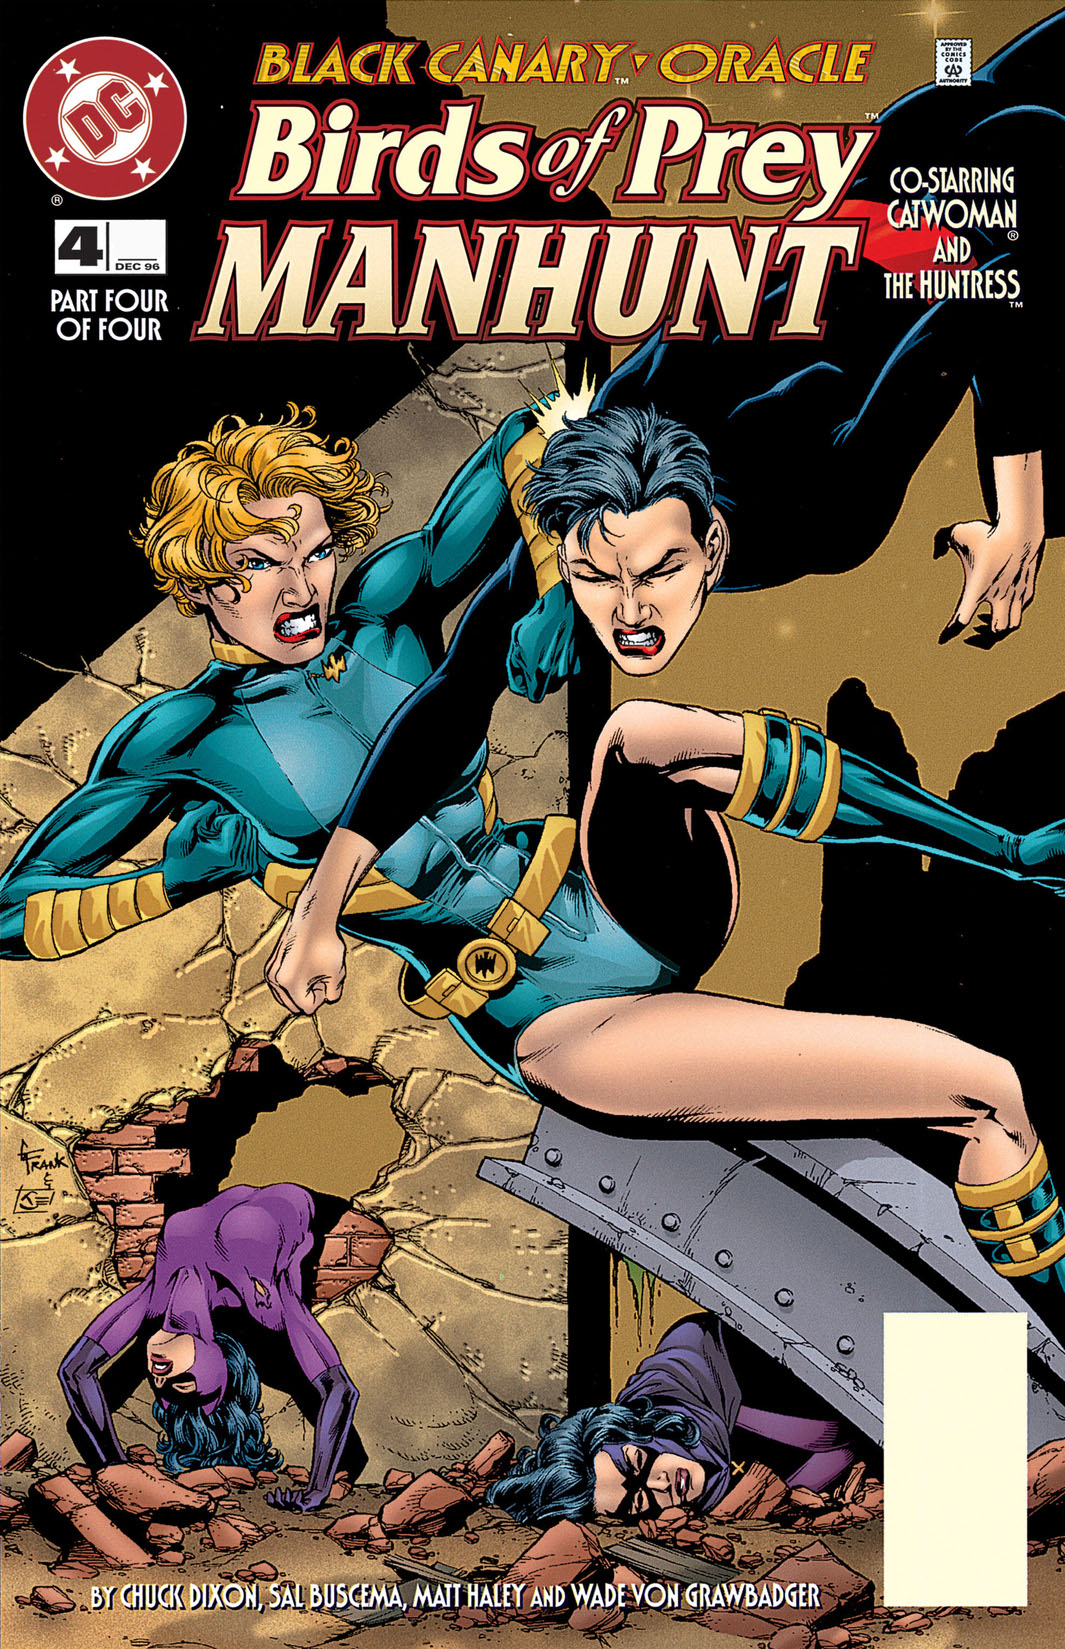 Birds of Prey: Manhunt #4 preview images